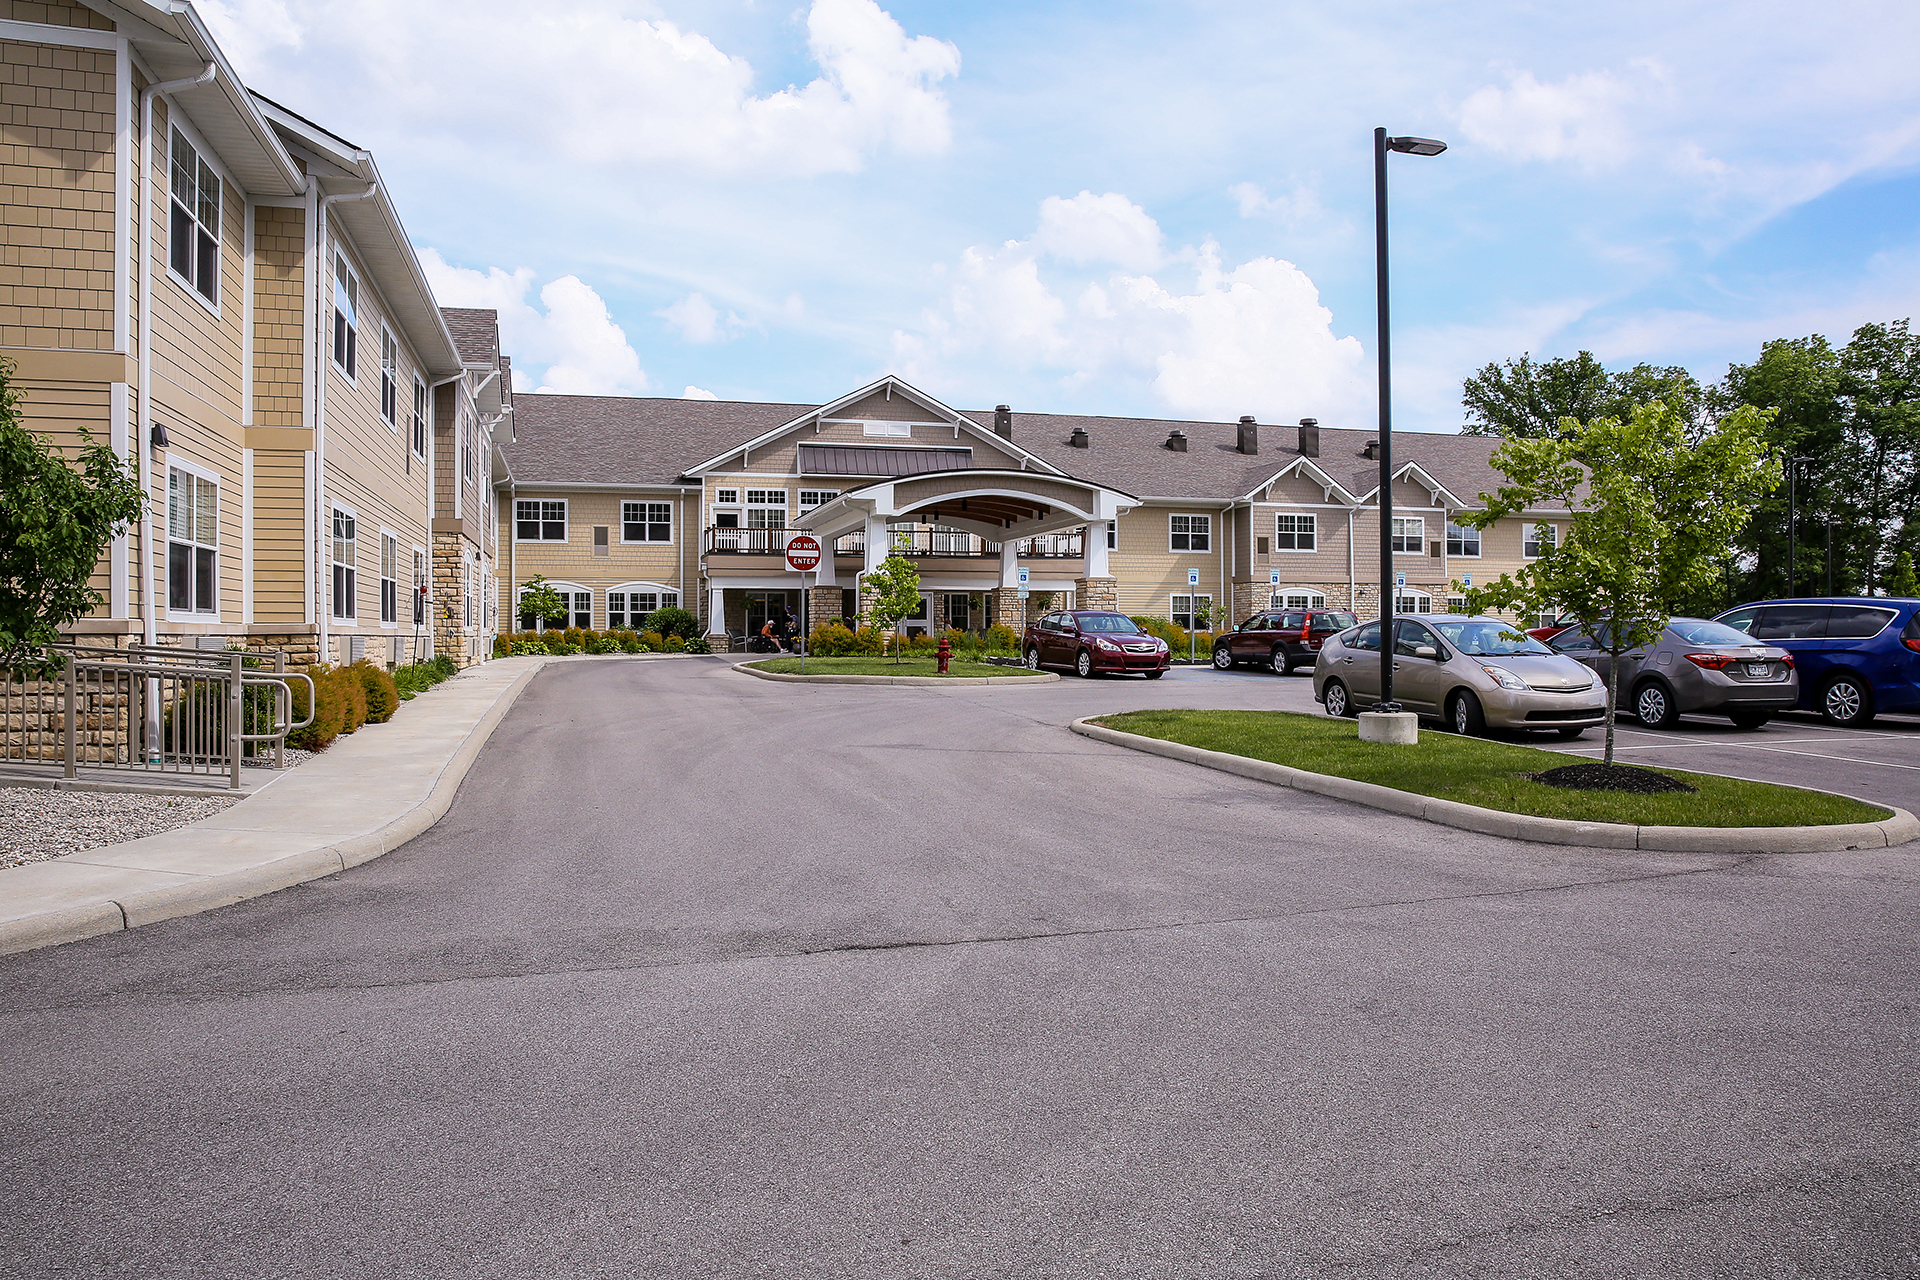 external view of the Trilogy Senior Living building and parking lot